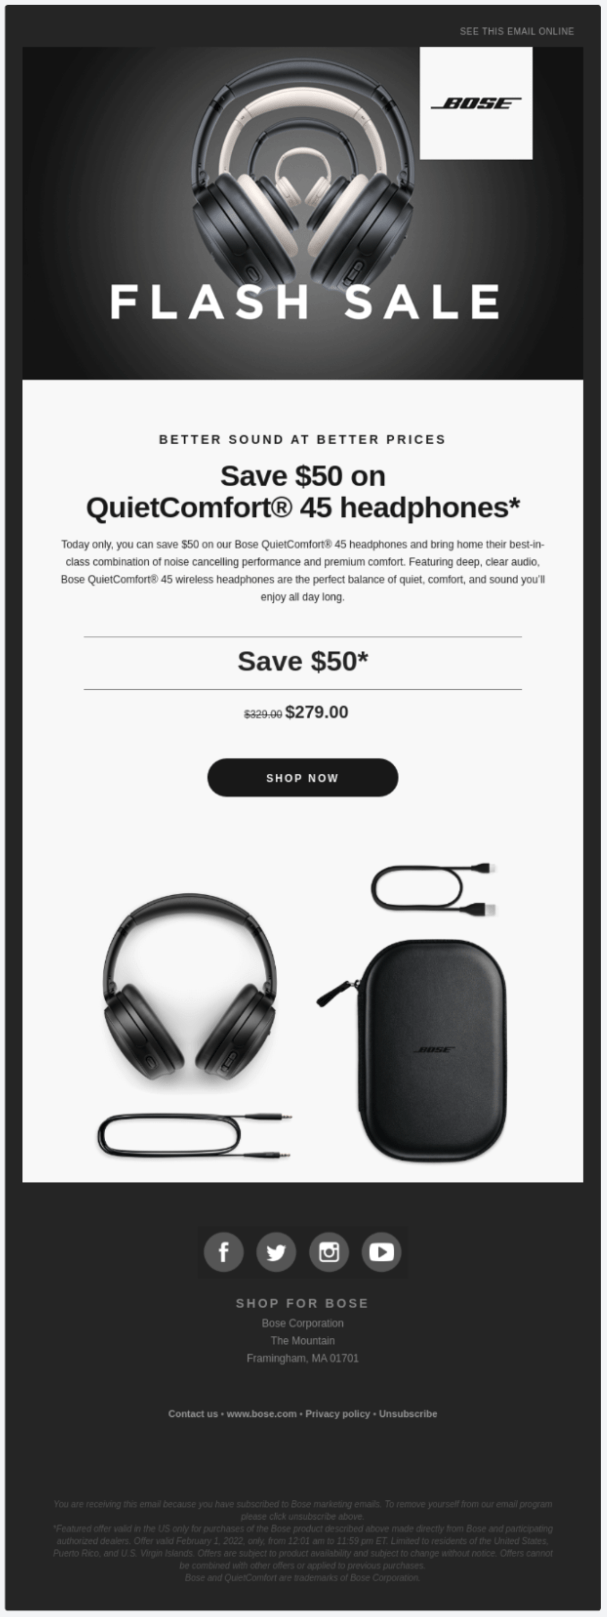 Bose flash sale email